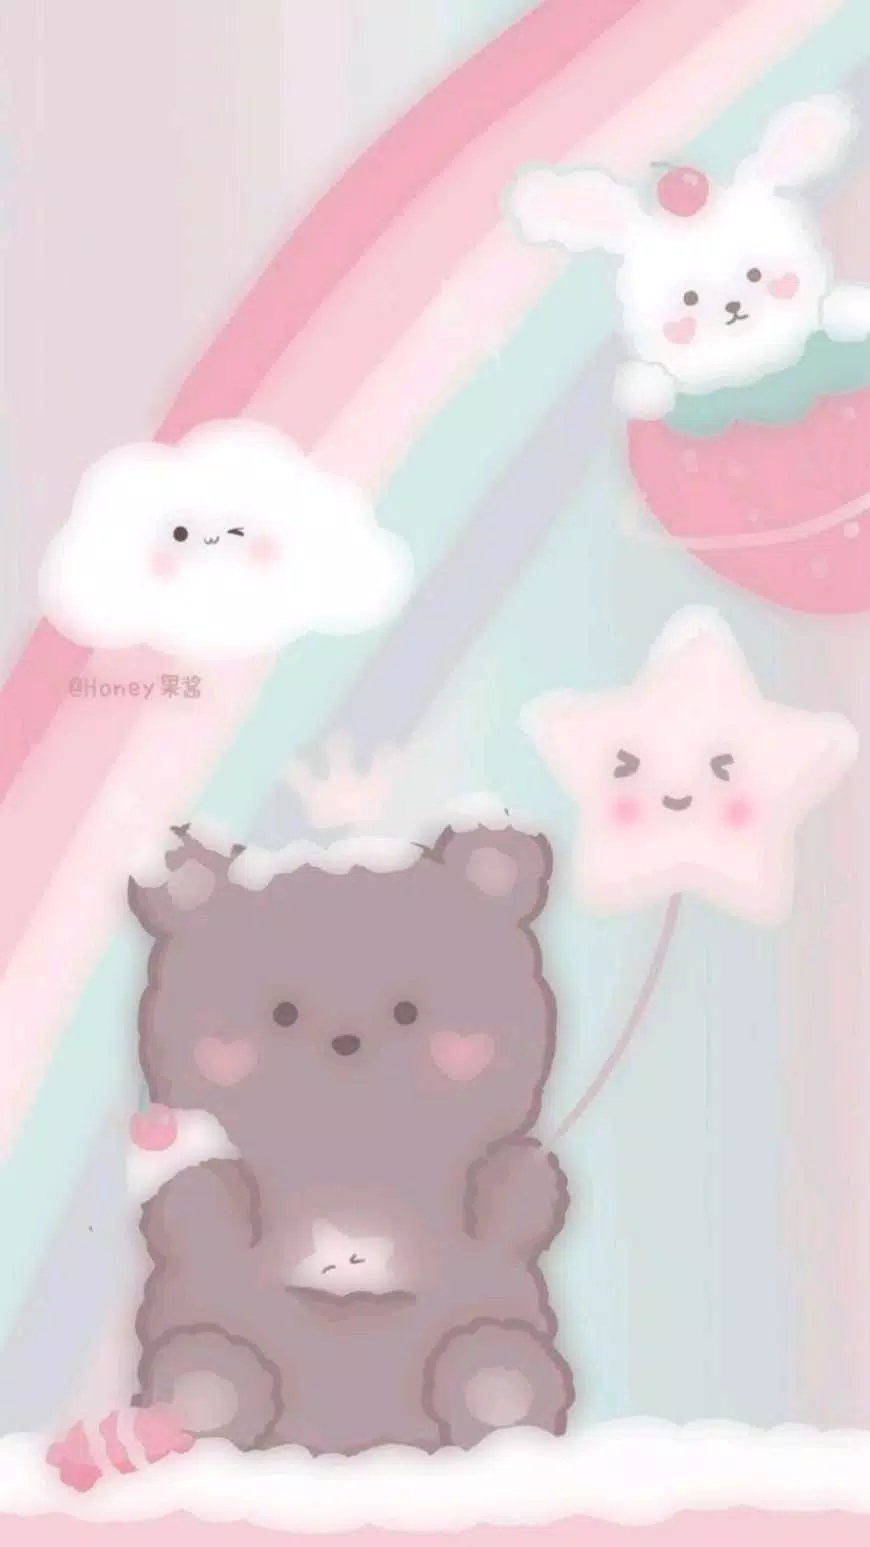 An illustration of a brown bear holding a pink balloon with a white rabbit in the background - Kawaii, pretty